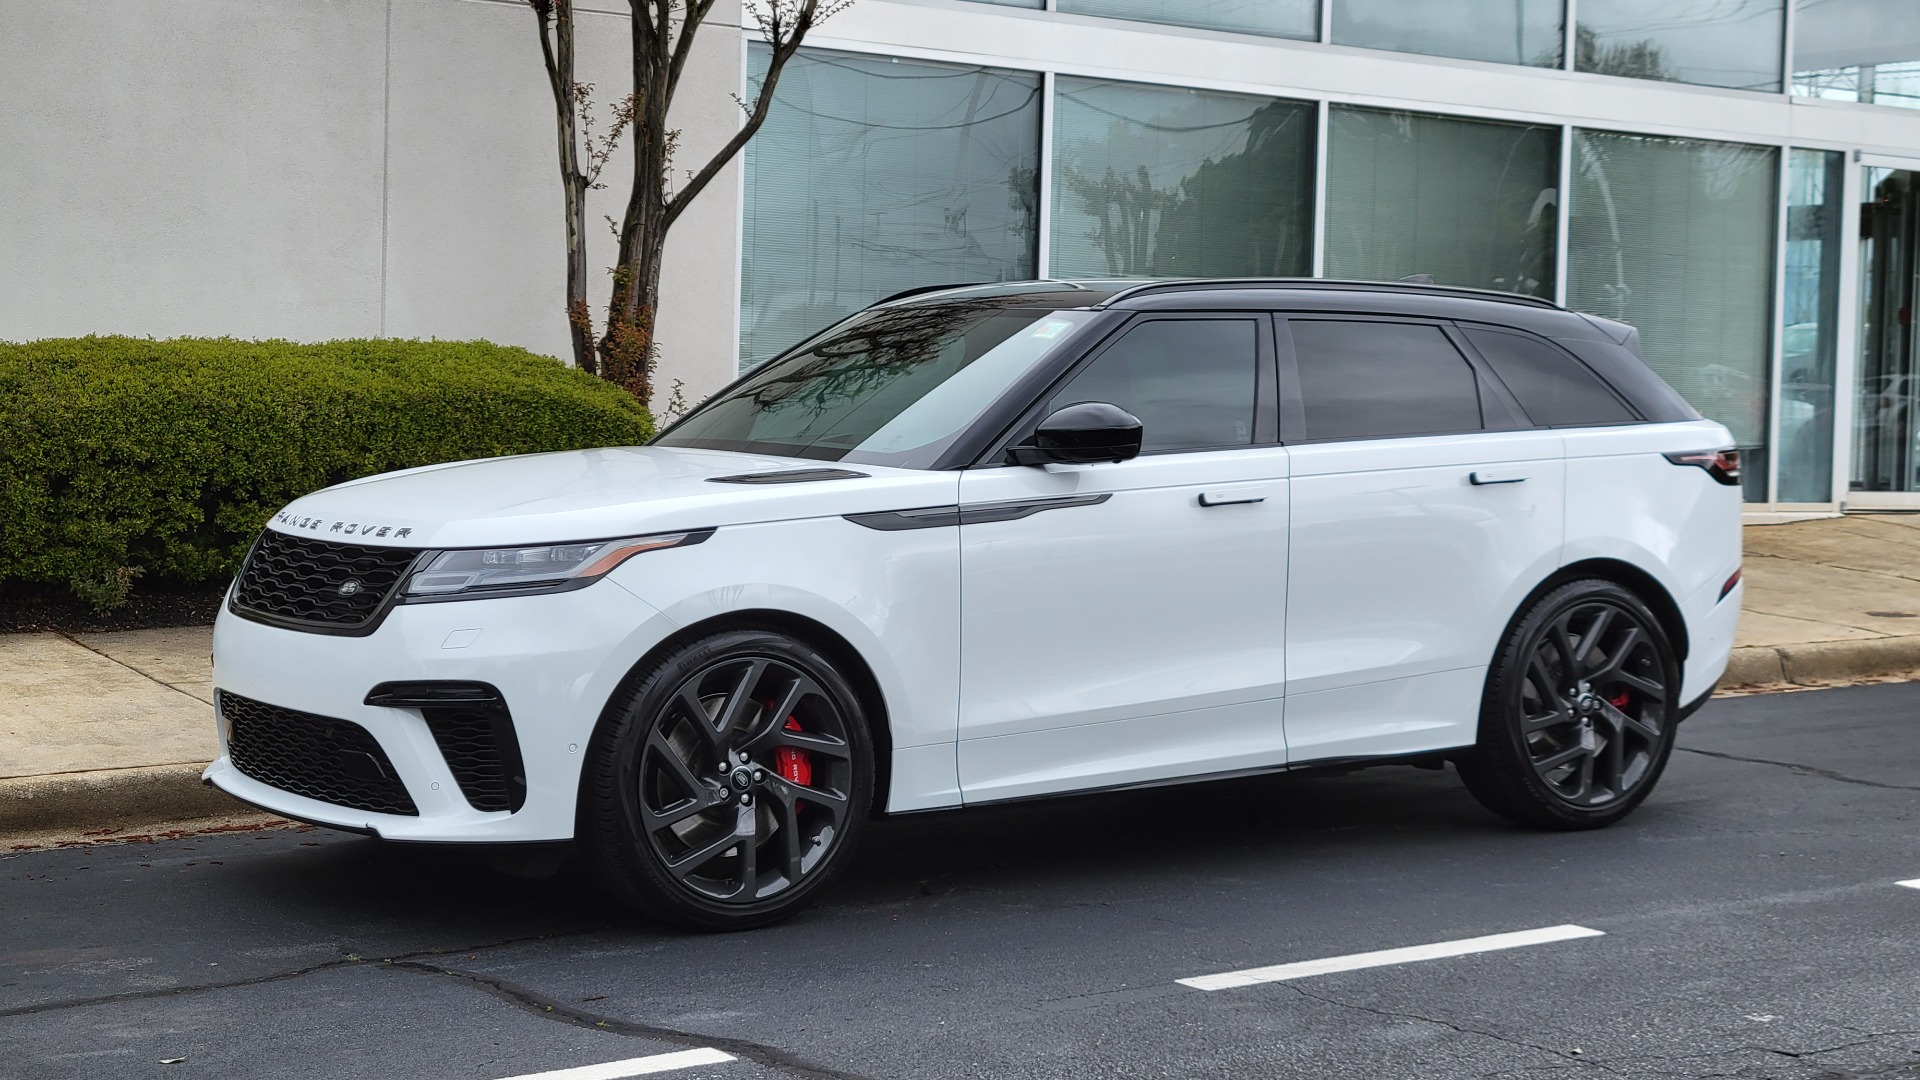 Used 2020 Land Rover Range Rover Velar SVAutobiography Dynamic Edition for sale $90,995 at Formula Imports in Charlotte NC 28227 1